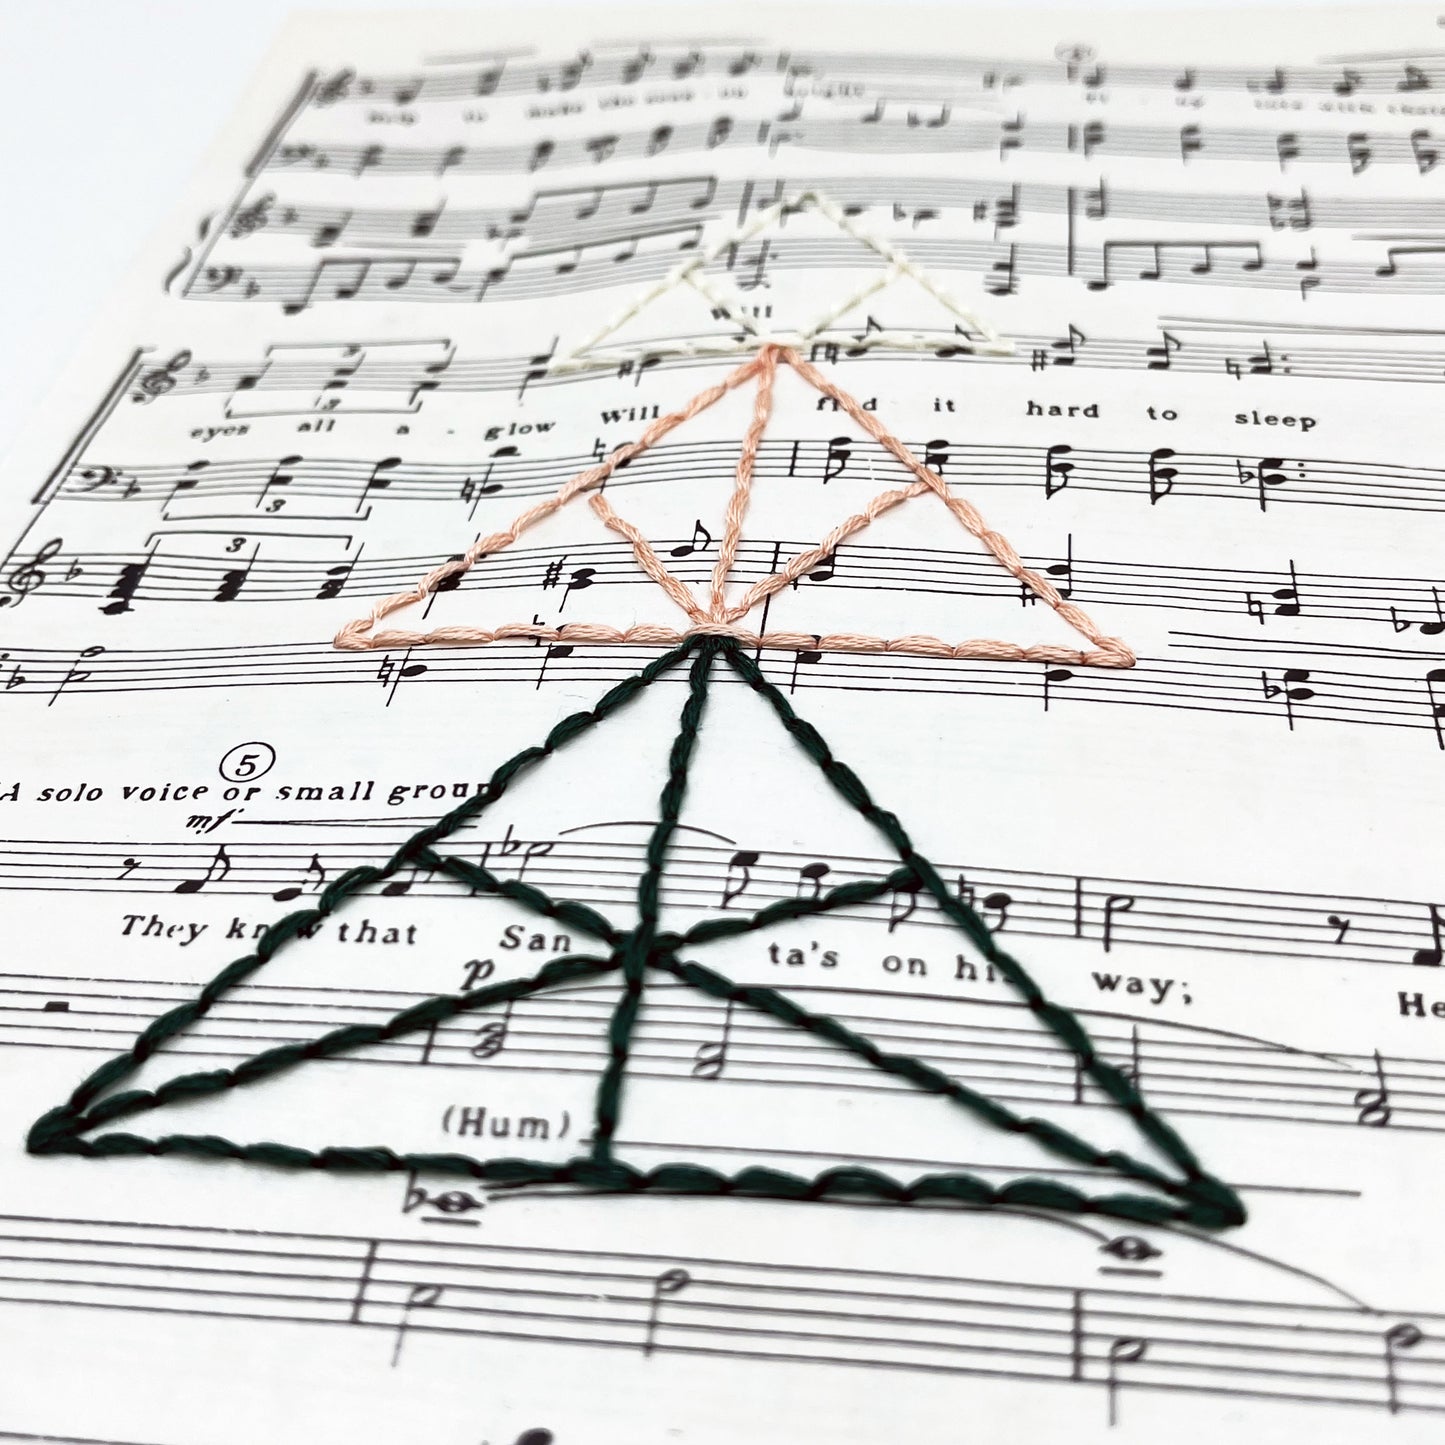 a close up angled view of sheet music from "The Christmas Song", hand stitched over with a Christmas tree made from triangles, in green, peach and ivory thread